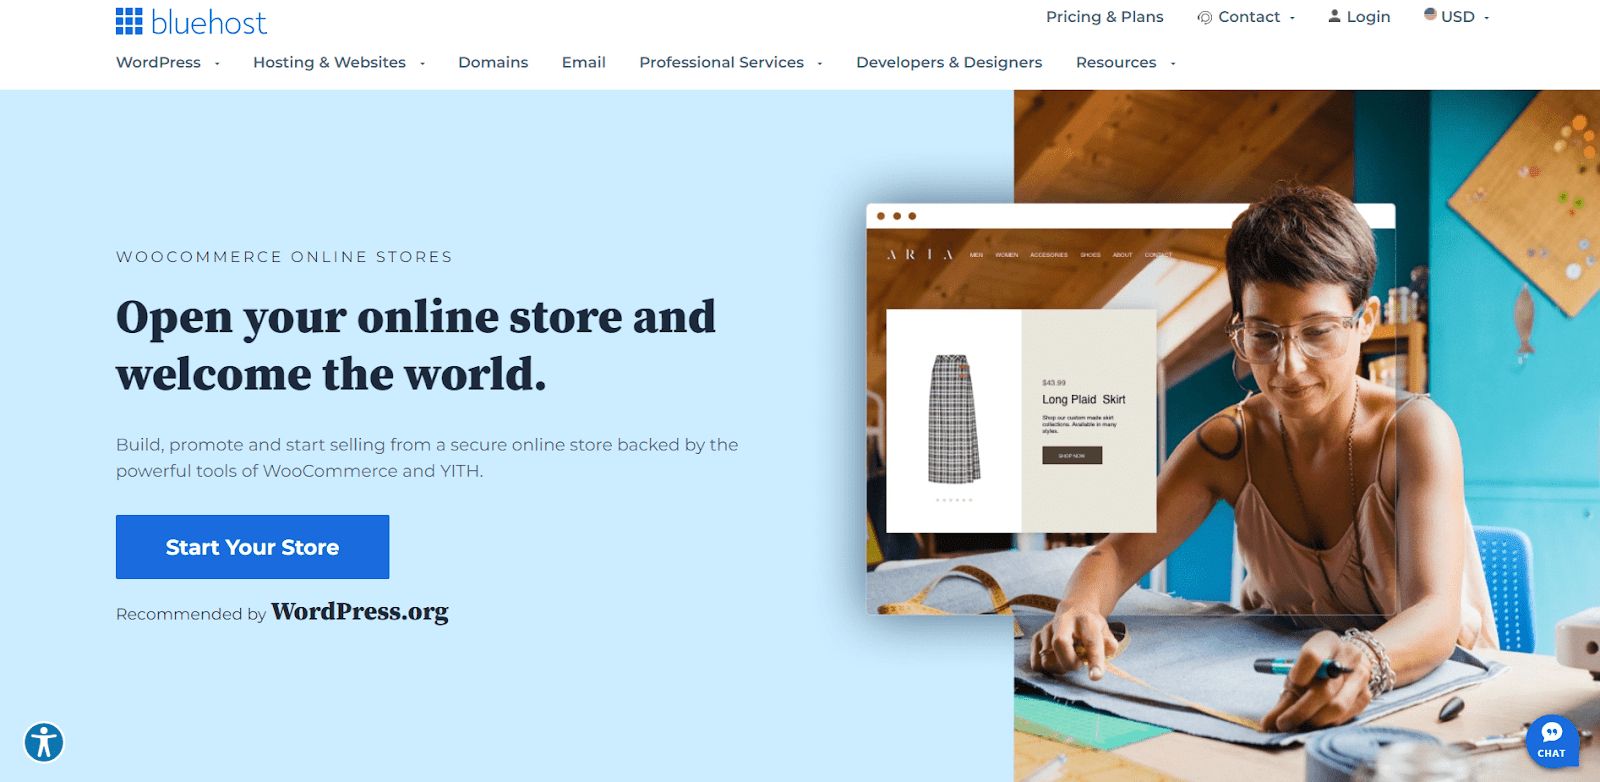 Bluehost’s plentiful storage and startup-friendly hosting plans make it one of the best WooCommerce hosting providers in 2023.